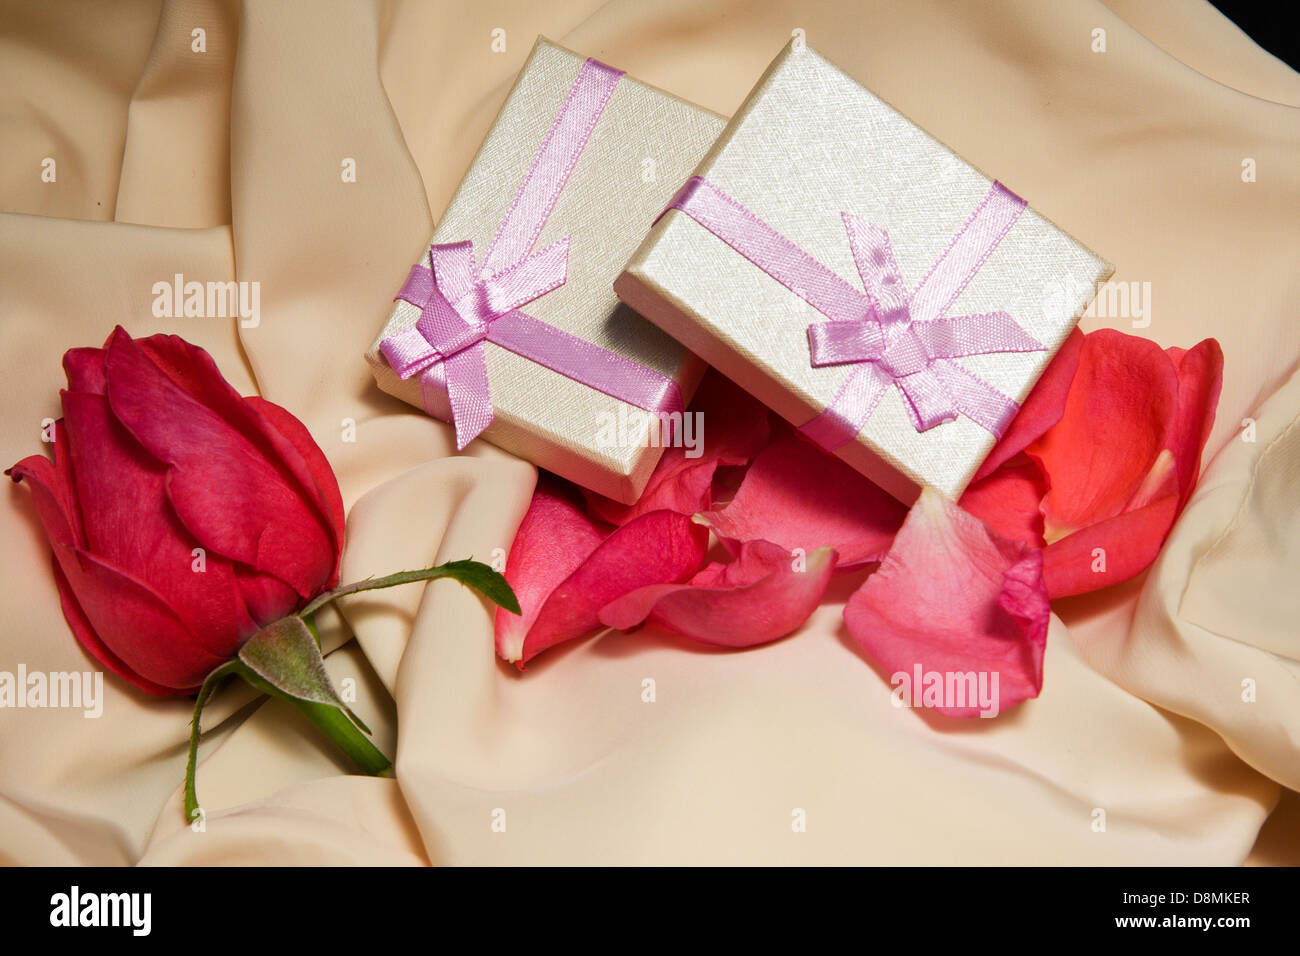 Gift Boxes over satin with rose arrangement. Stock Photo